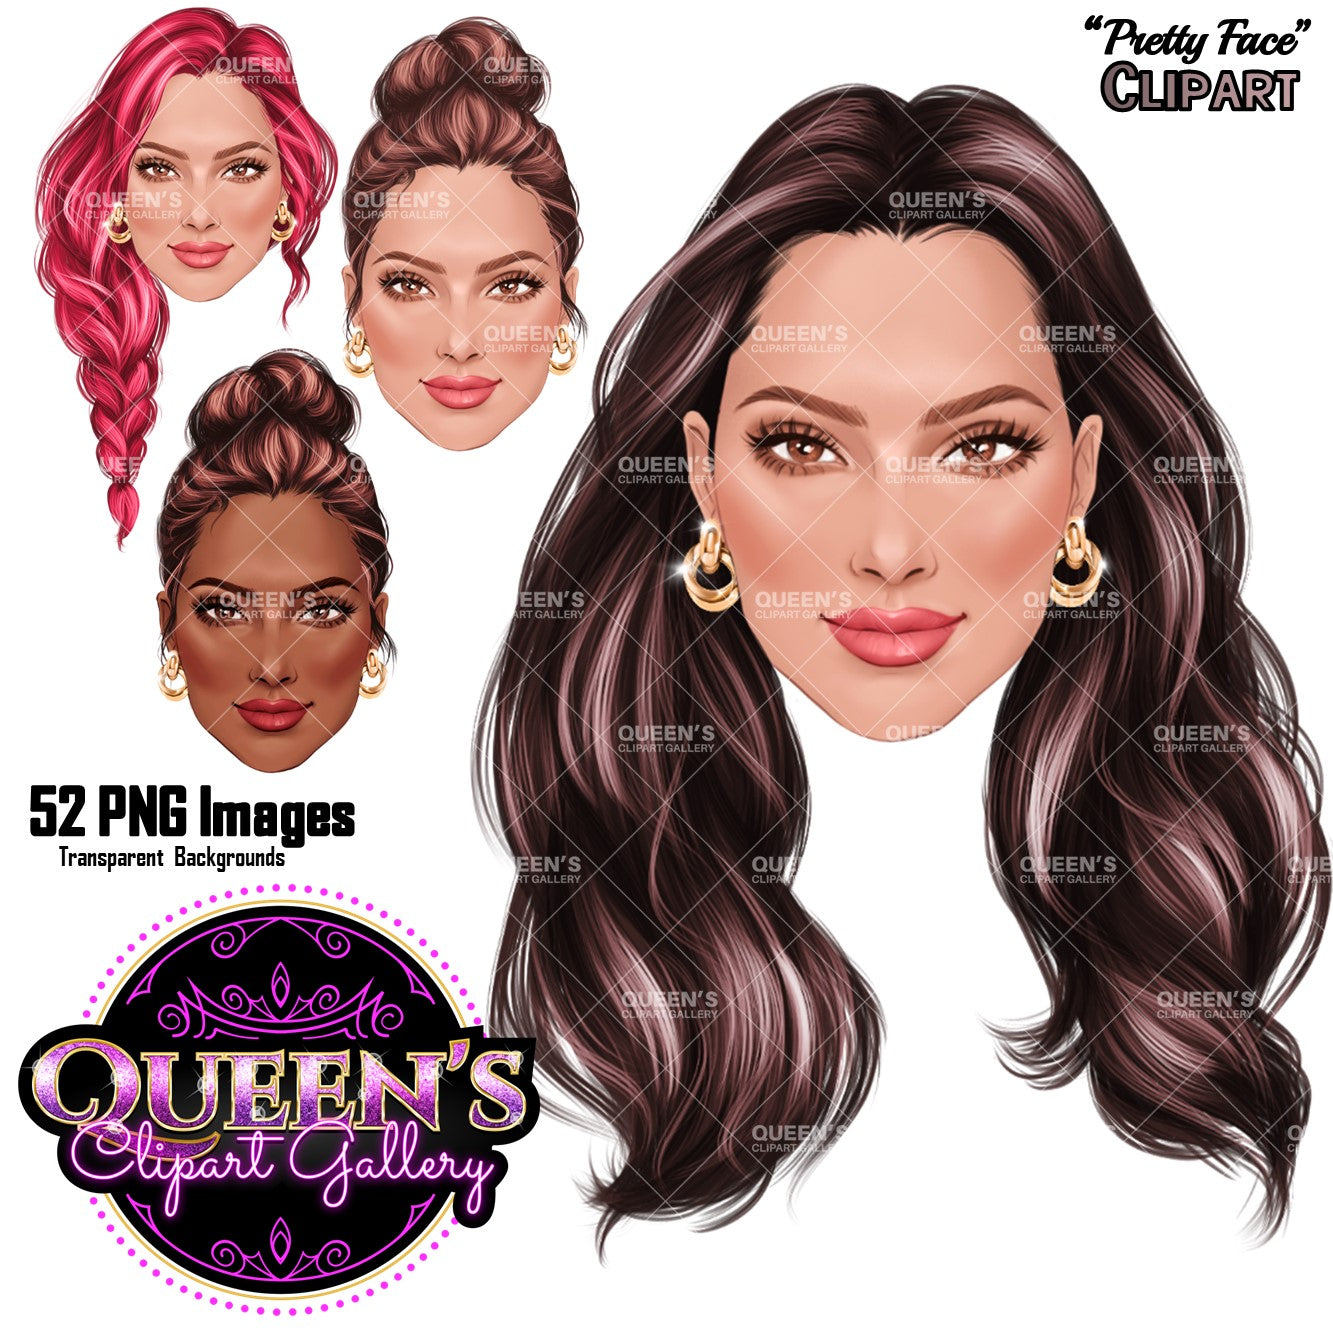 Woman face clipart, Hairstyles clipart, Face clipart, Face chart, Beauty clipart, Fashion clipart, Fashion girl clipart, Fashion PNG, Face